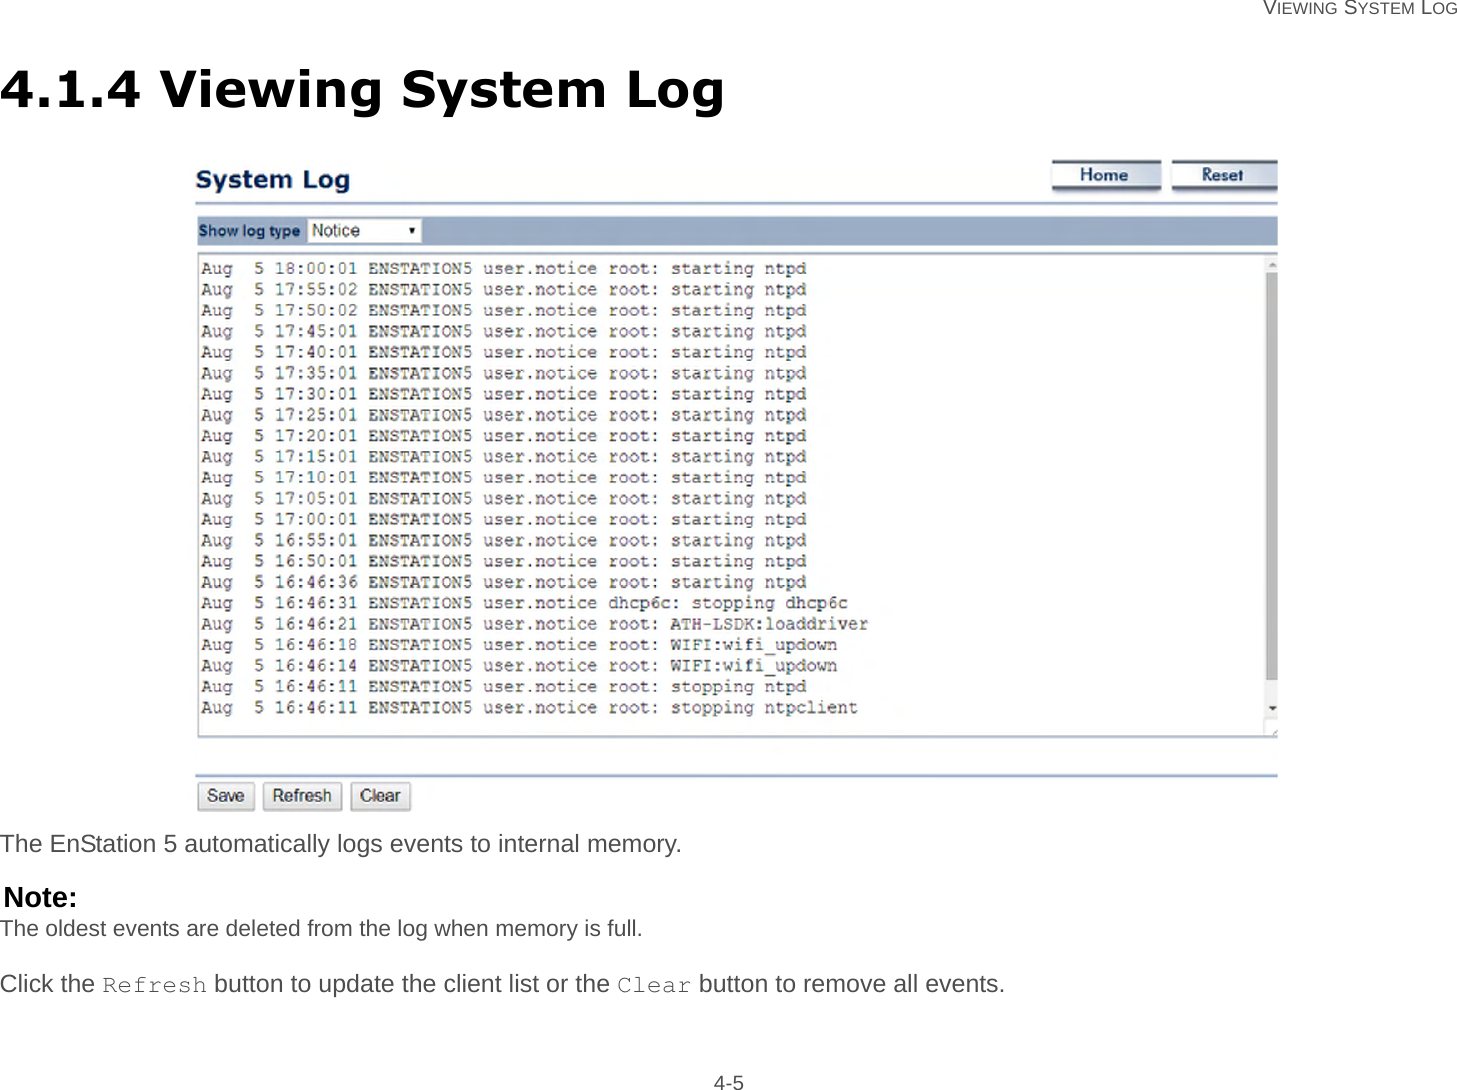   VIEWING SYSTEM LOG 4-54.1.4 Viewing System LogThe EnStation 5 automatically logs events to internal memory.Note:The oldest events are deleted from the log when memory is full.Click the Refresh button to update the client list or the Clear button to remove all events.